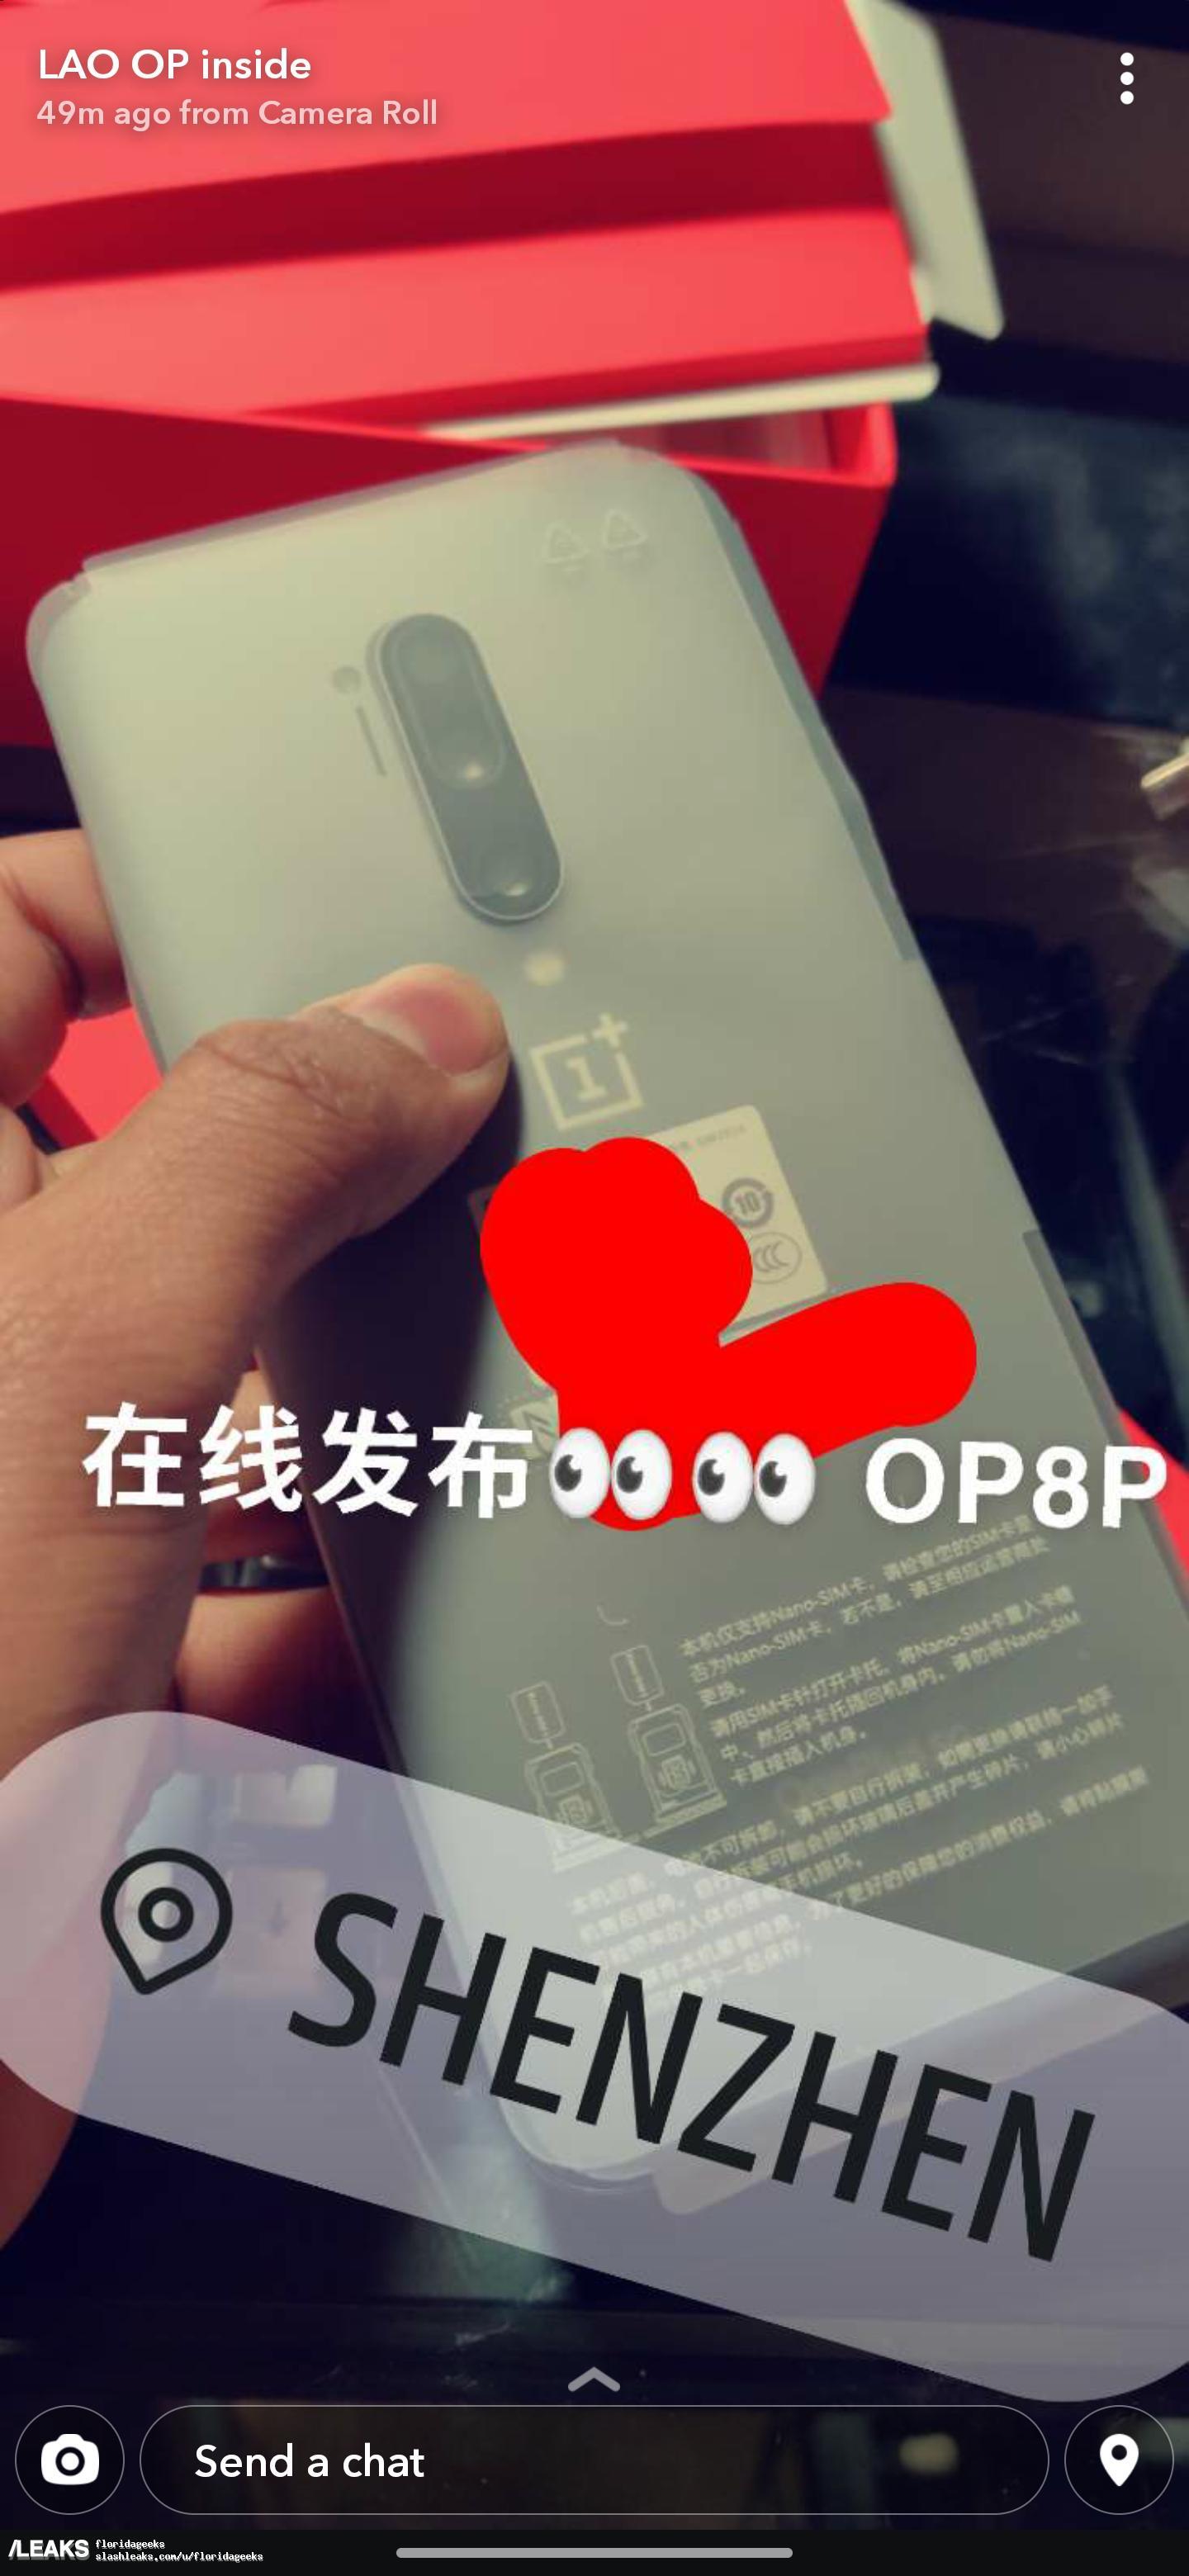 Live image of the OnePlus 8 Pro&#039;s rear panel which includes the triple-camera setup and a ToF sensor - Leaked live photo shows the OnePlus 8 Pro&#039;s back panel (Nope, they&#039;re fakes)